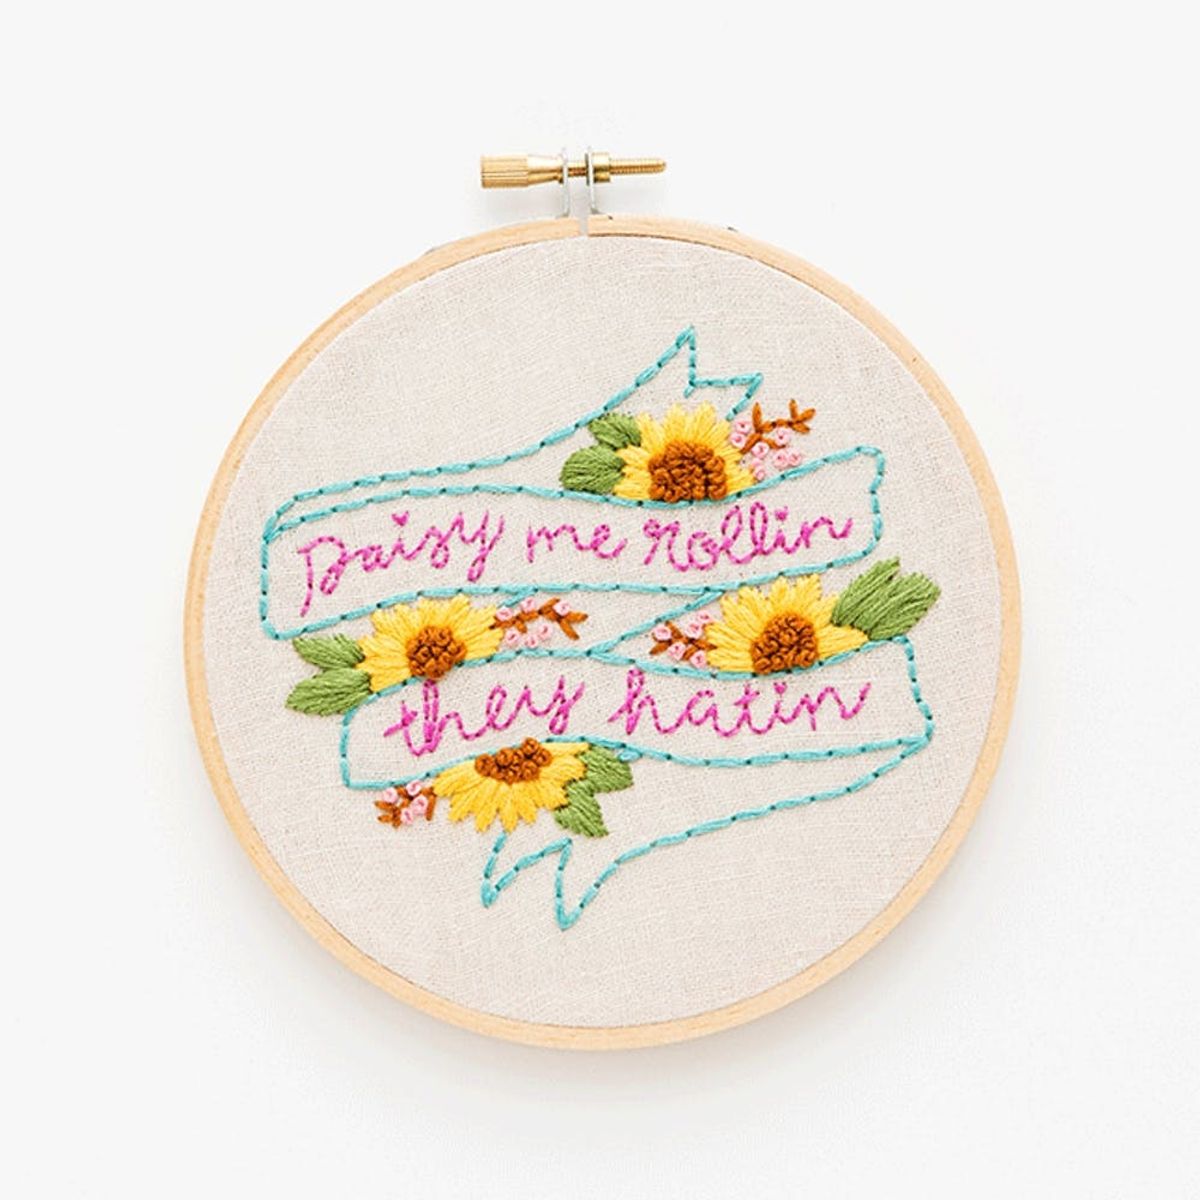 Learn How to Make Punny Embroidery With Our Online Class